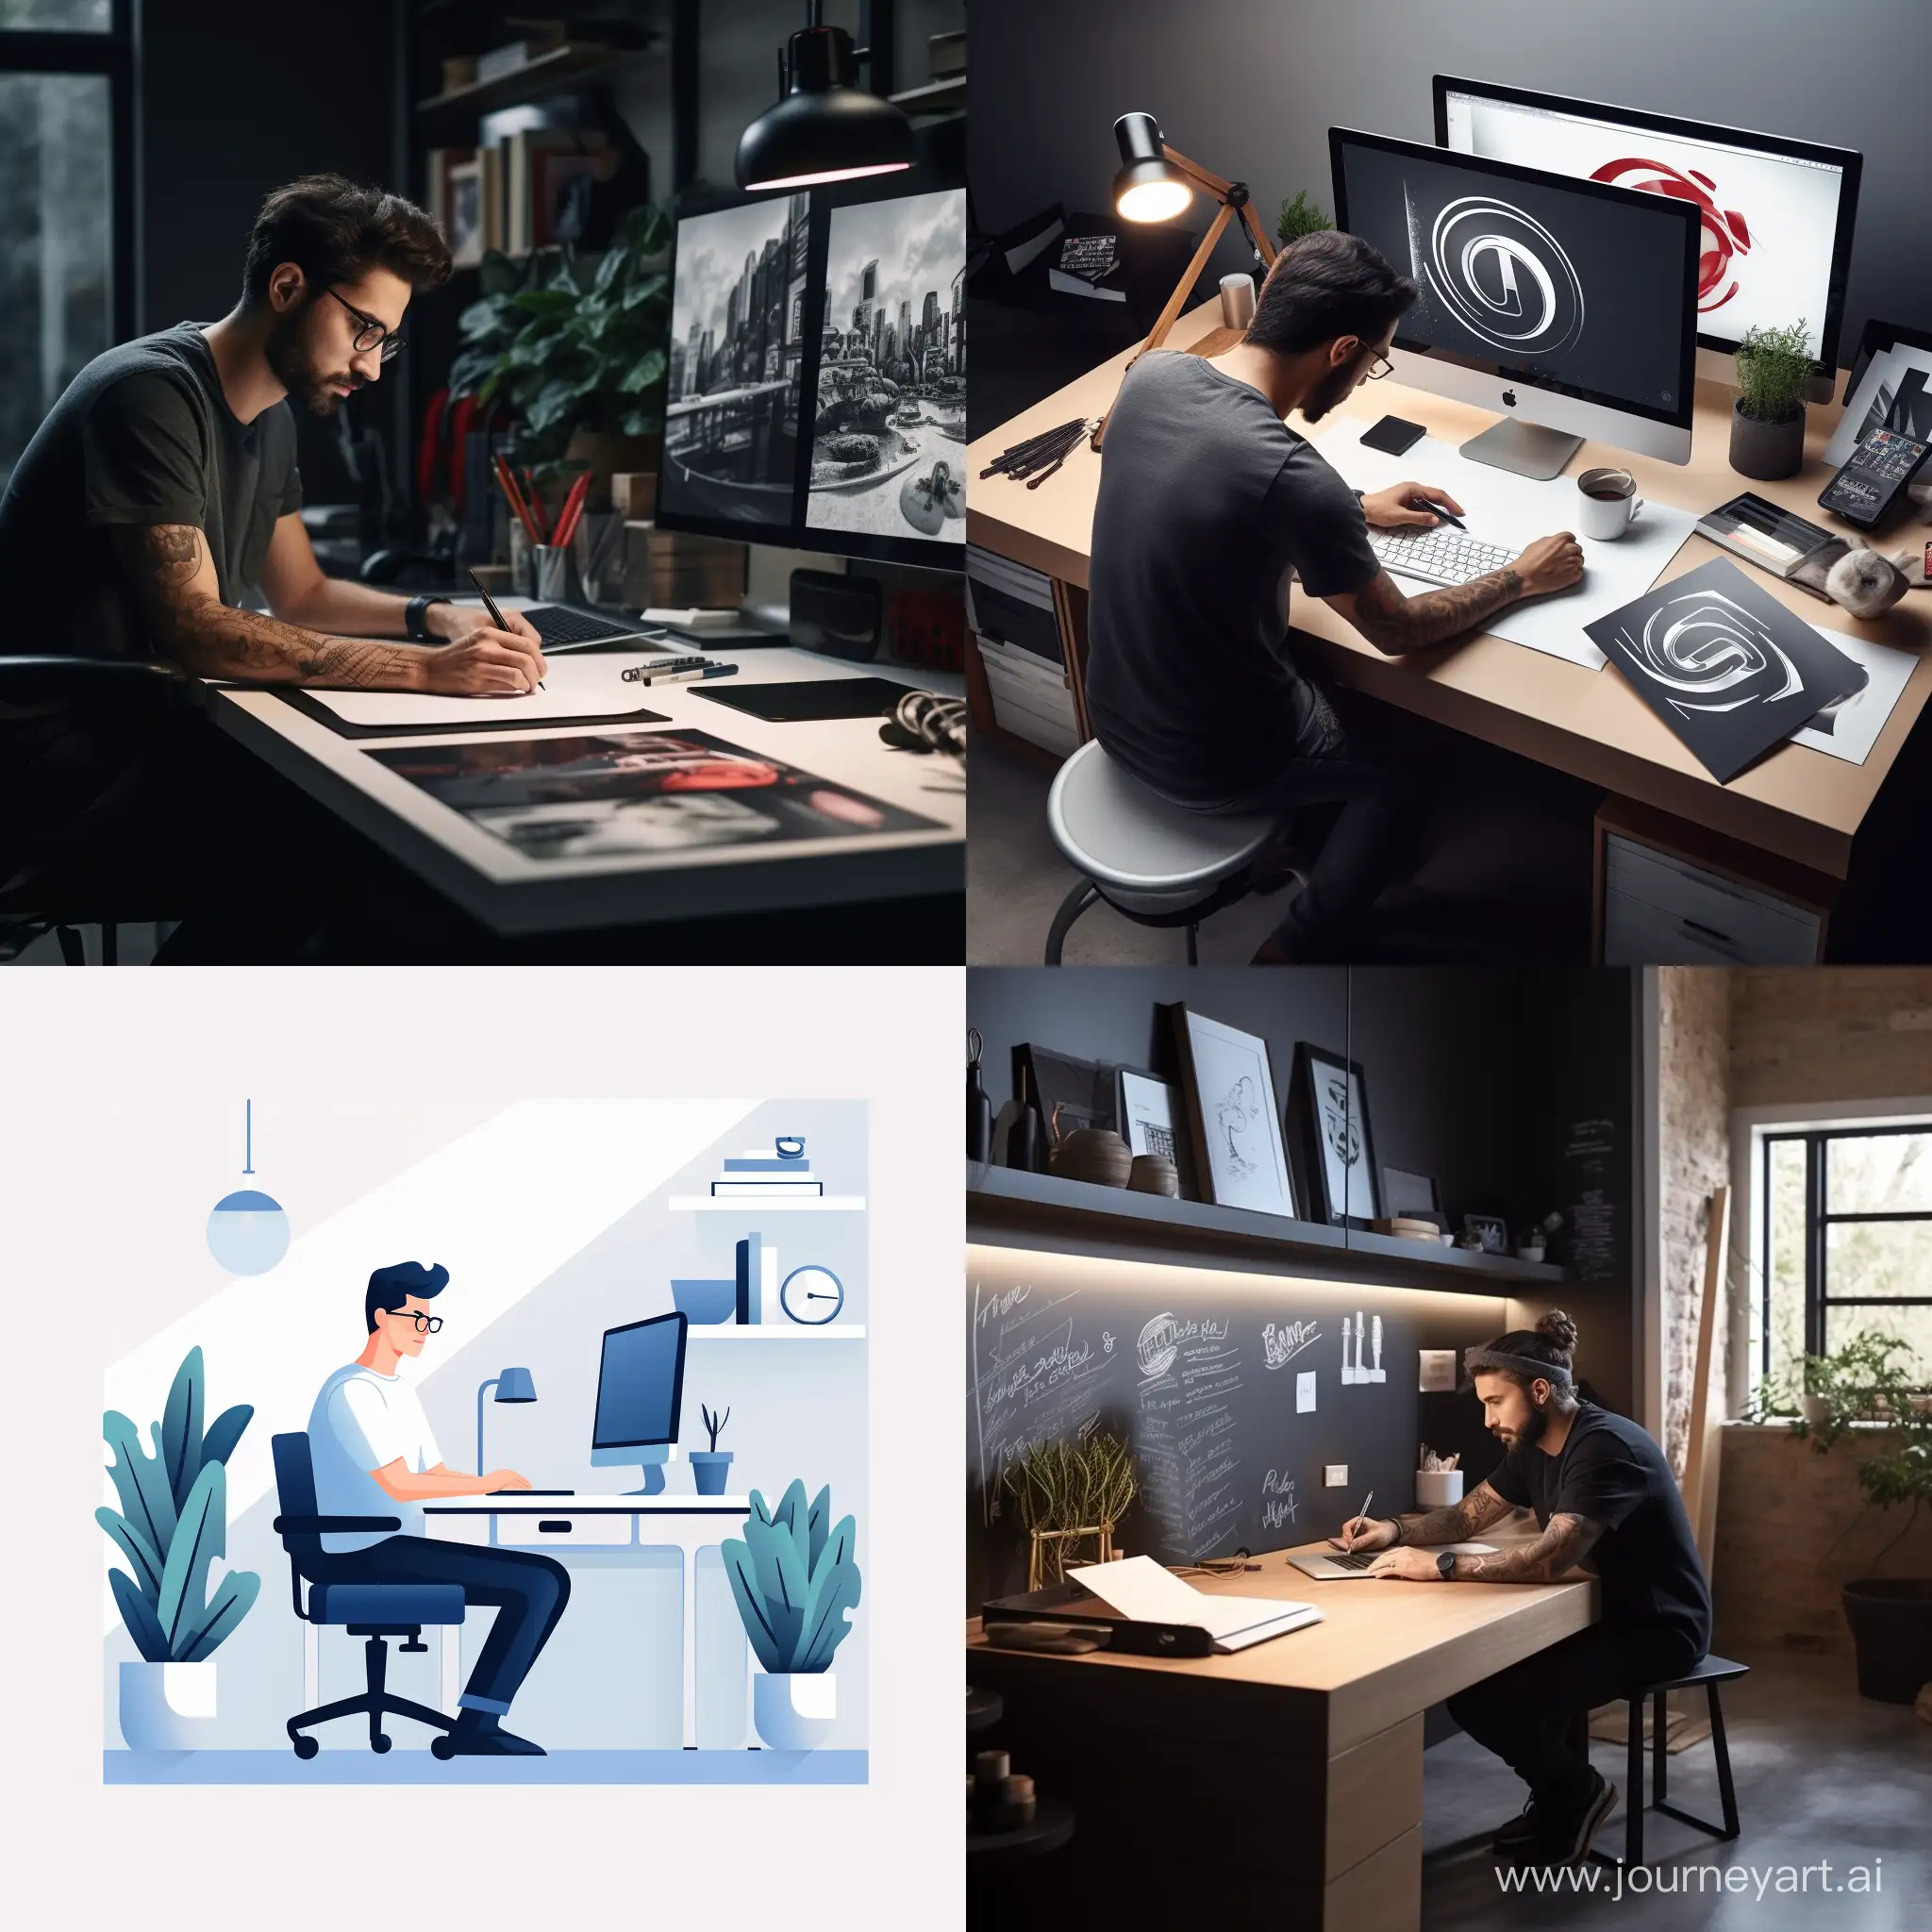 imagine a graphic designer while he is sketching a logo in his modern and minimal office.
